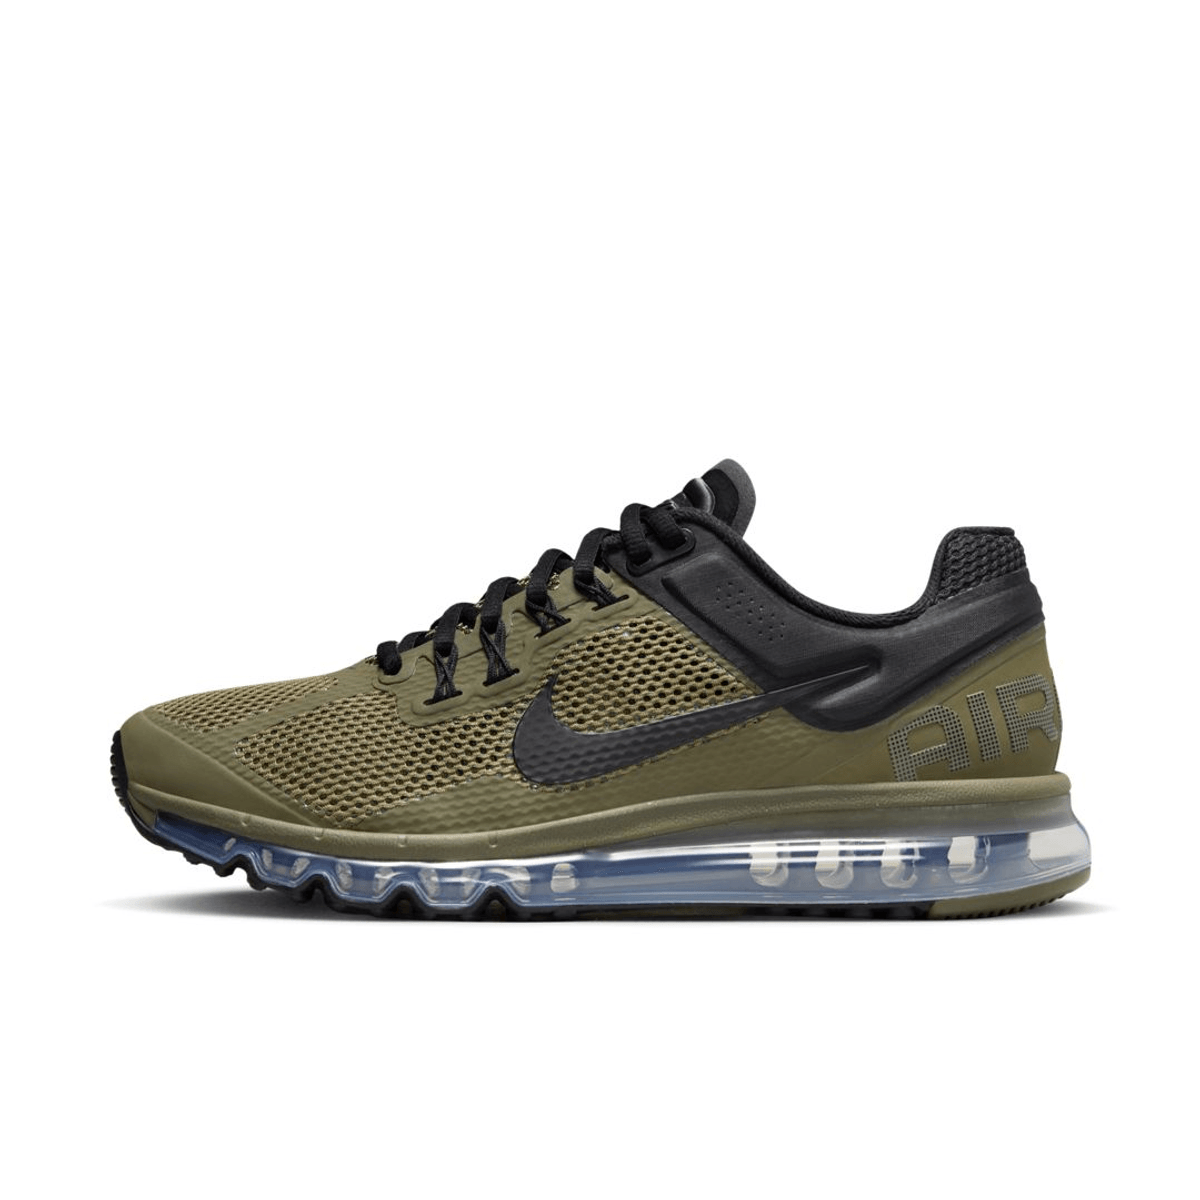 Official Images Of The Nike Air Max 2013 "Olive/Black"